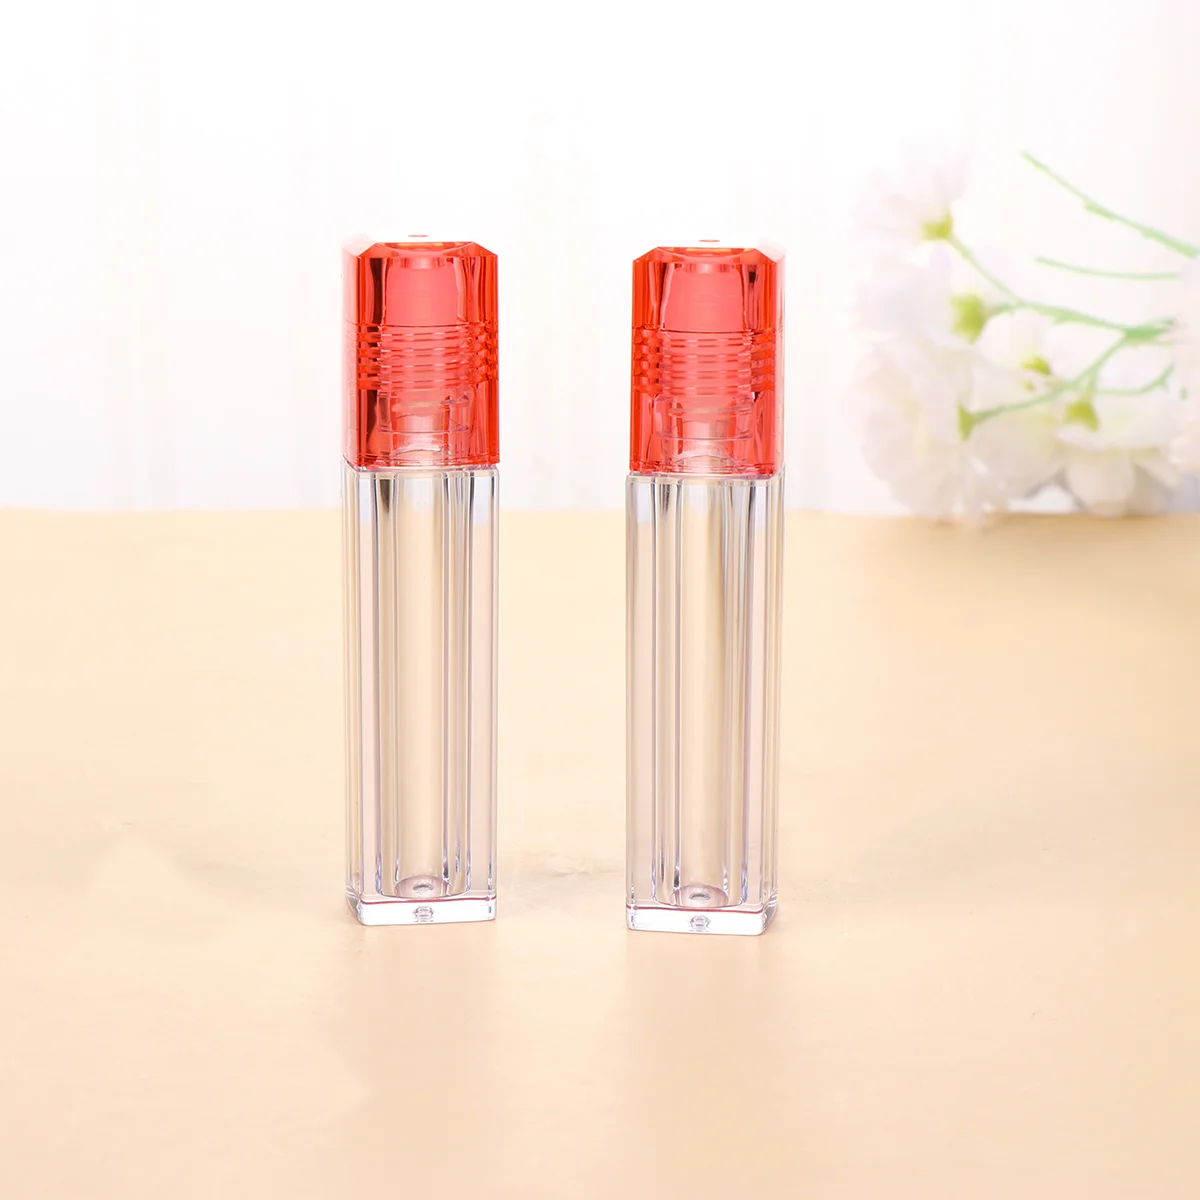 

10PCS Clear Gloss Lip Gloss Empty Lip Balm Tubes Containers With Caps For Crayon Lipstick Chapstick Homemade Lip Balm ( Red Cap